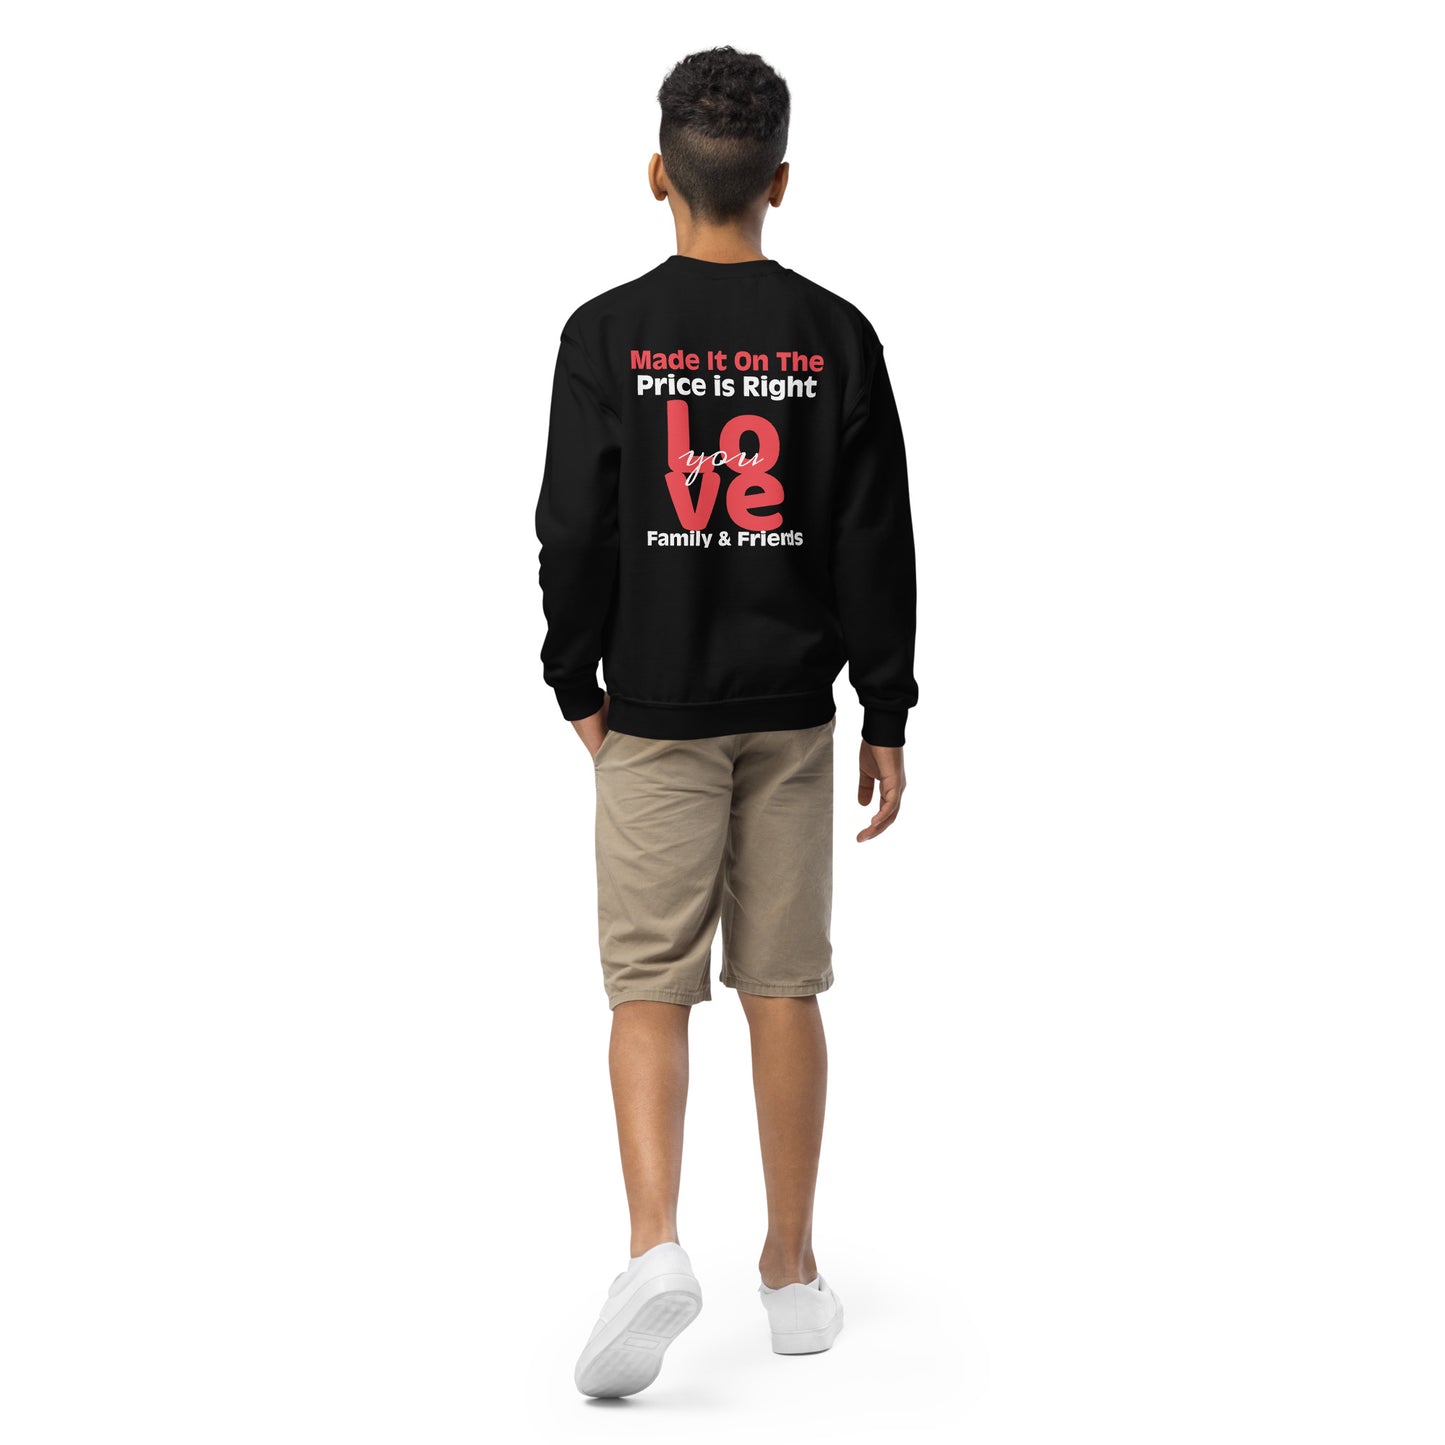 Youth crewneck sweatshirt - The Price Is Right - Spin The Wheel on Front - Greeting to Family & Friends on Back